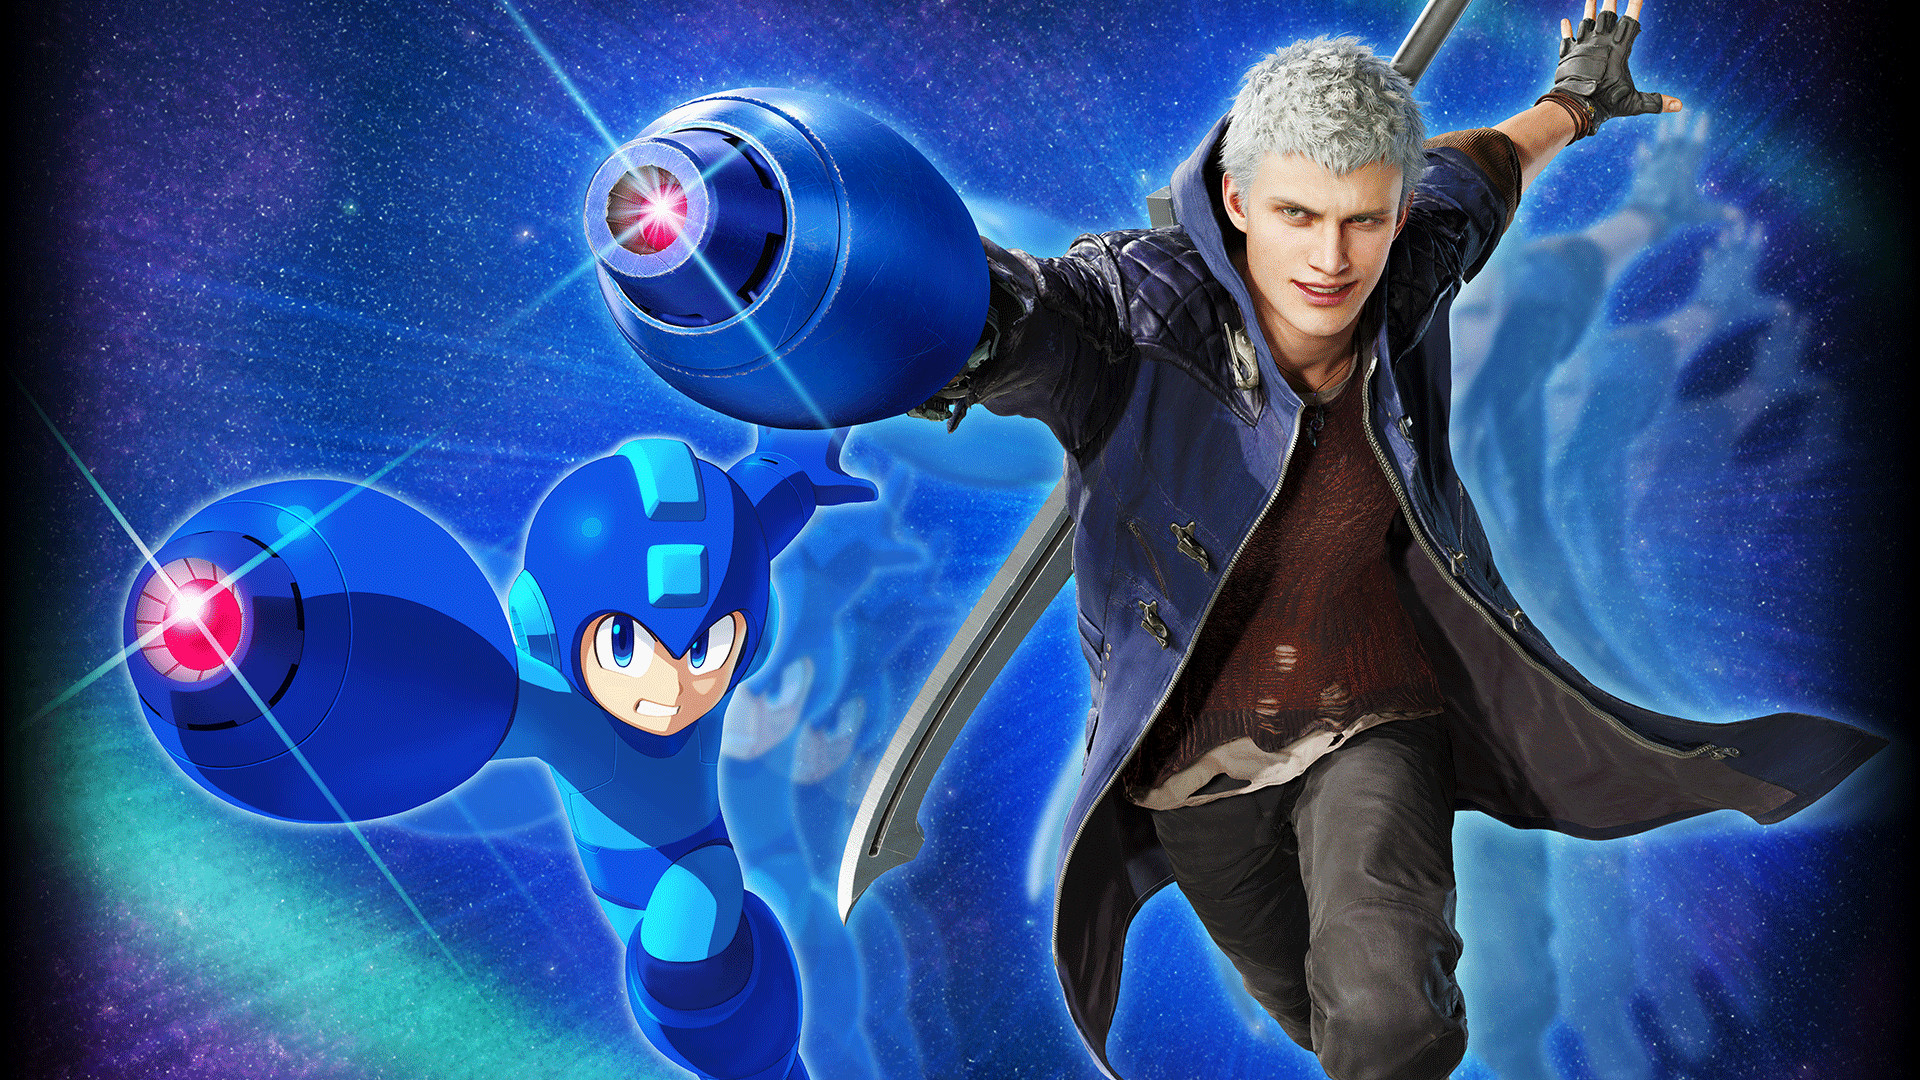 Devil May Cry 5 - Mega Buster Featured Screenshot #1